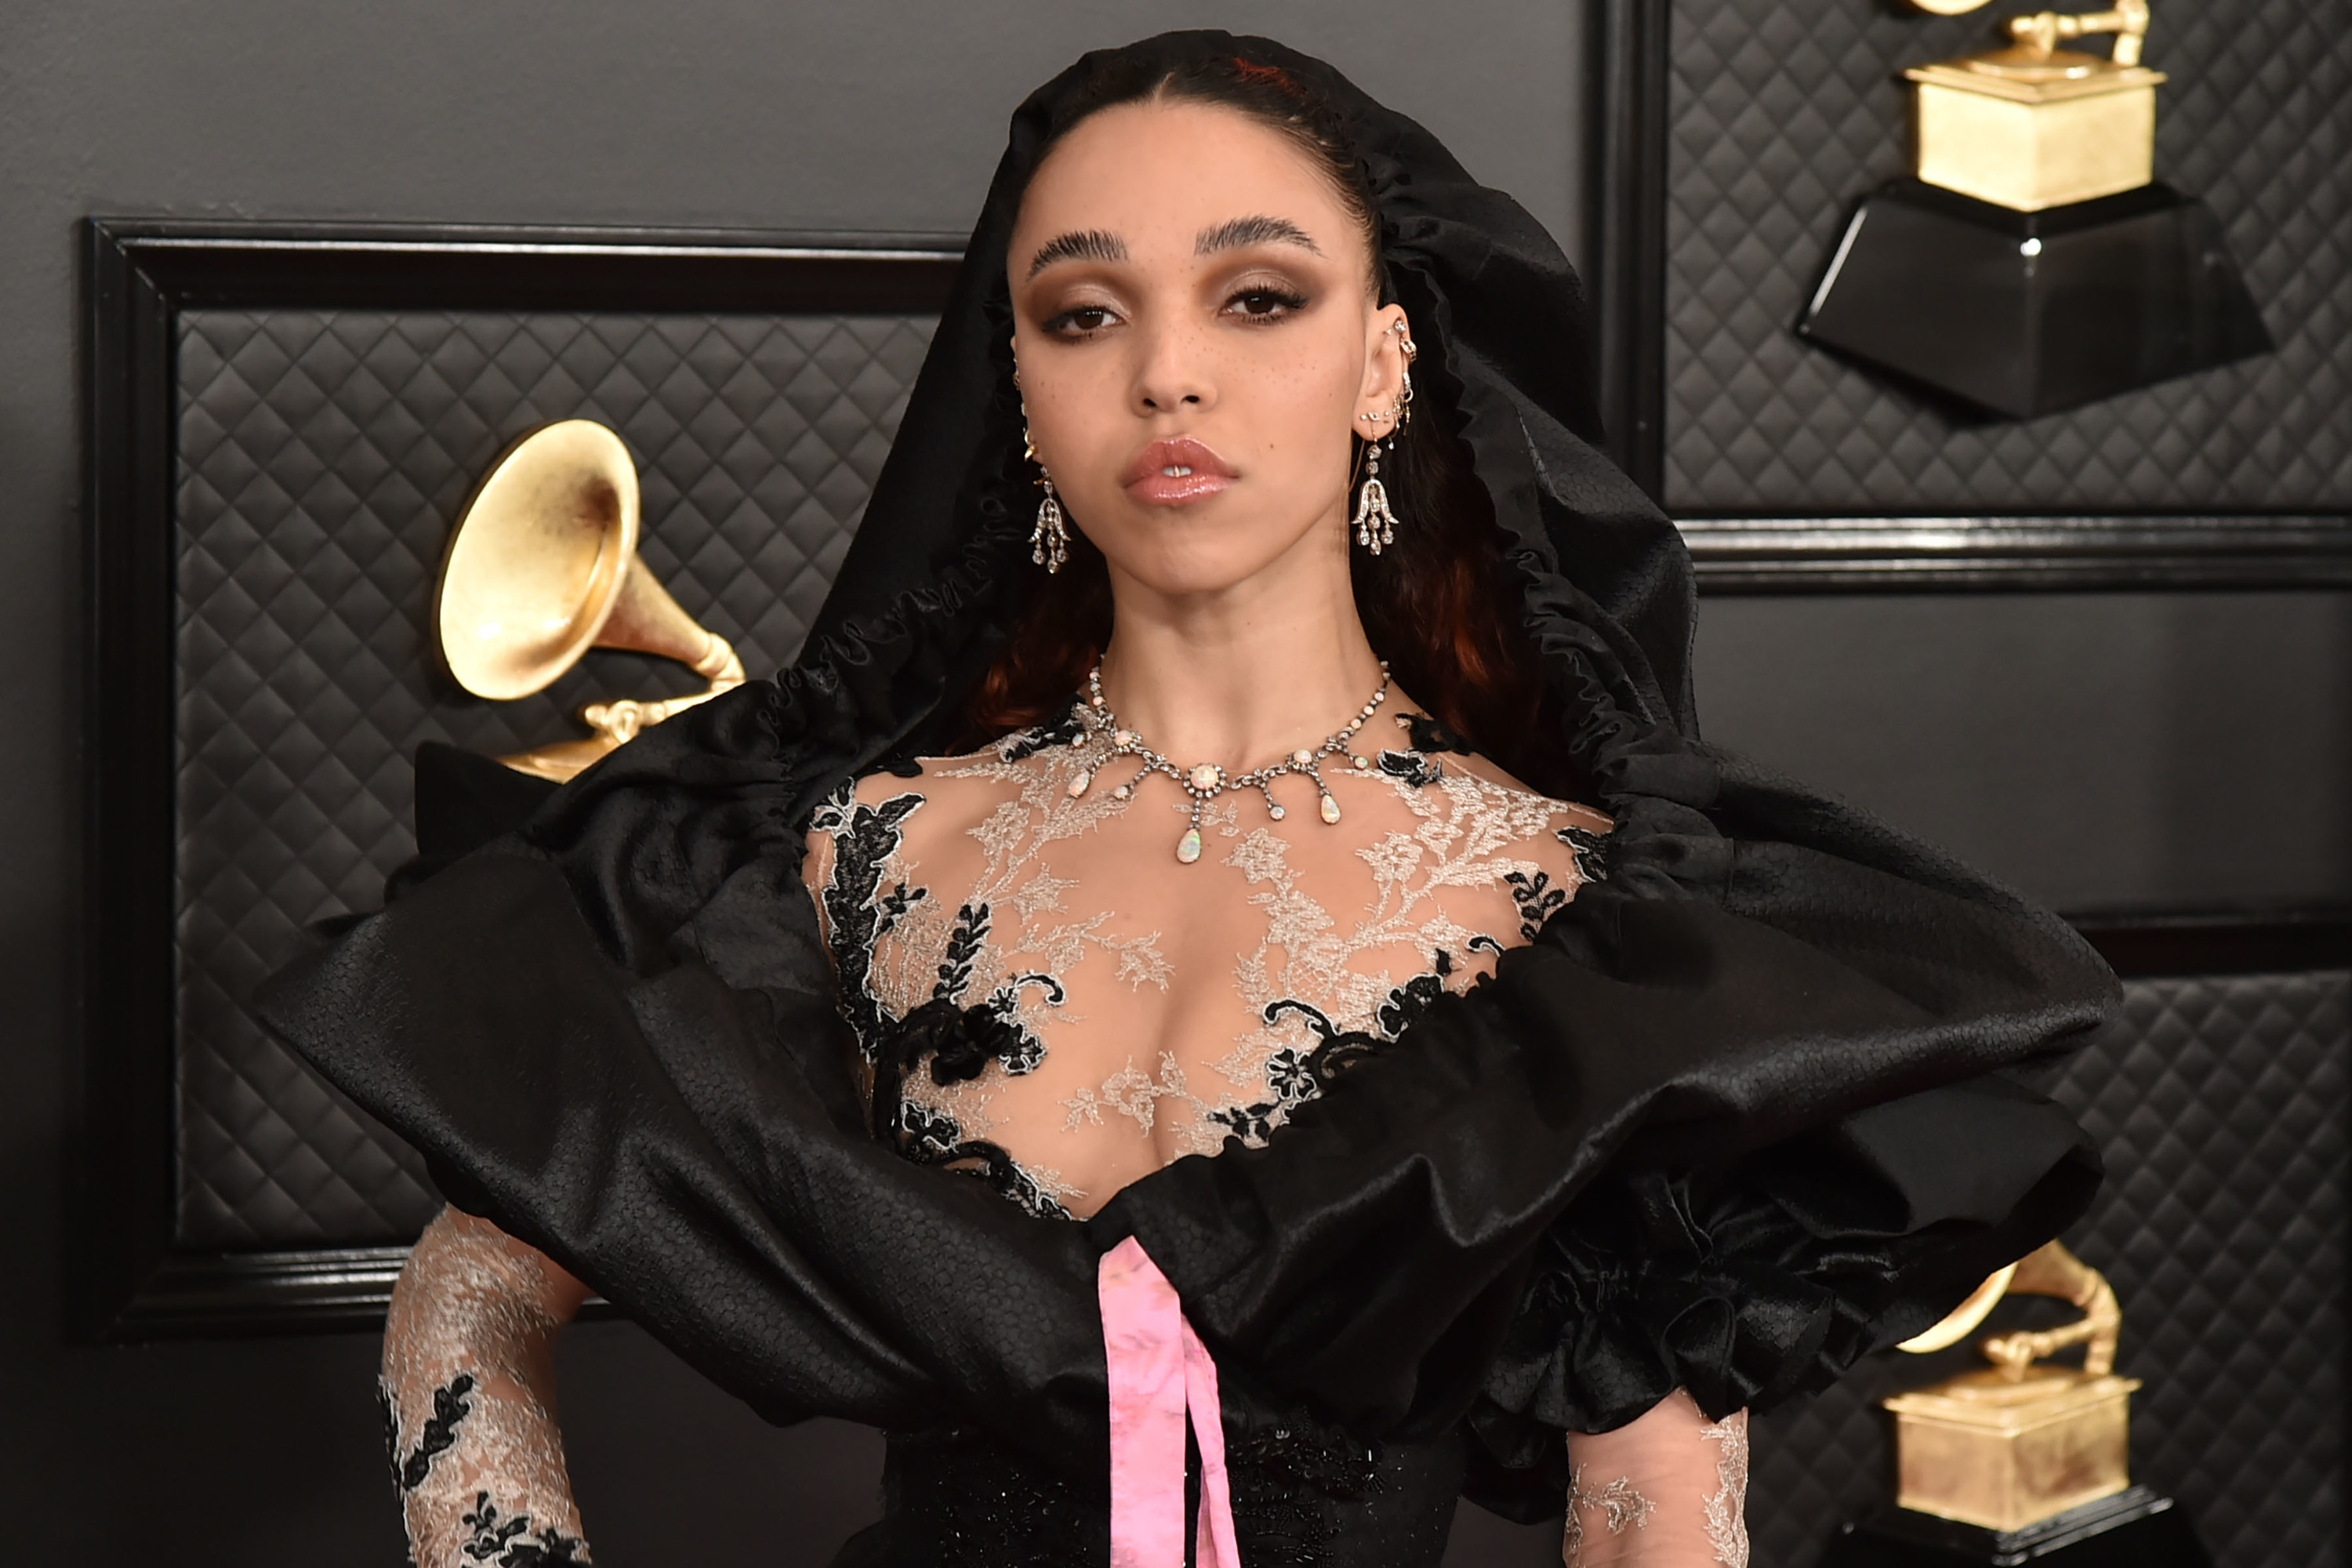 FKA twigs attends the 62nd Annual Grammy Awards in a low-cut outfit featuring lace around the neckline and a hood